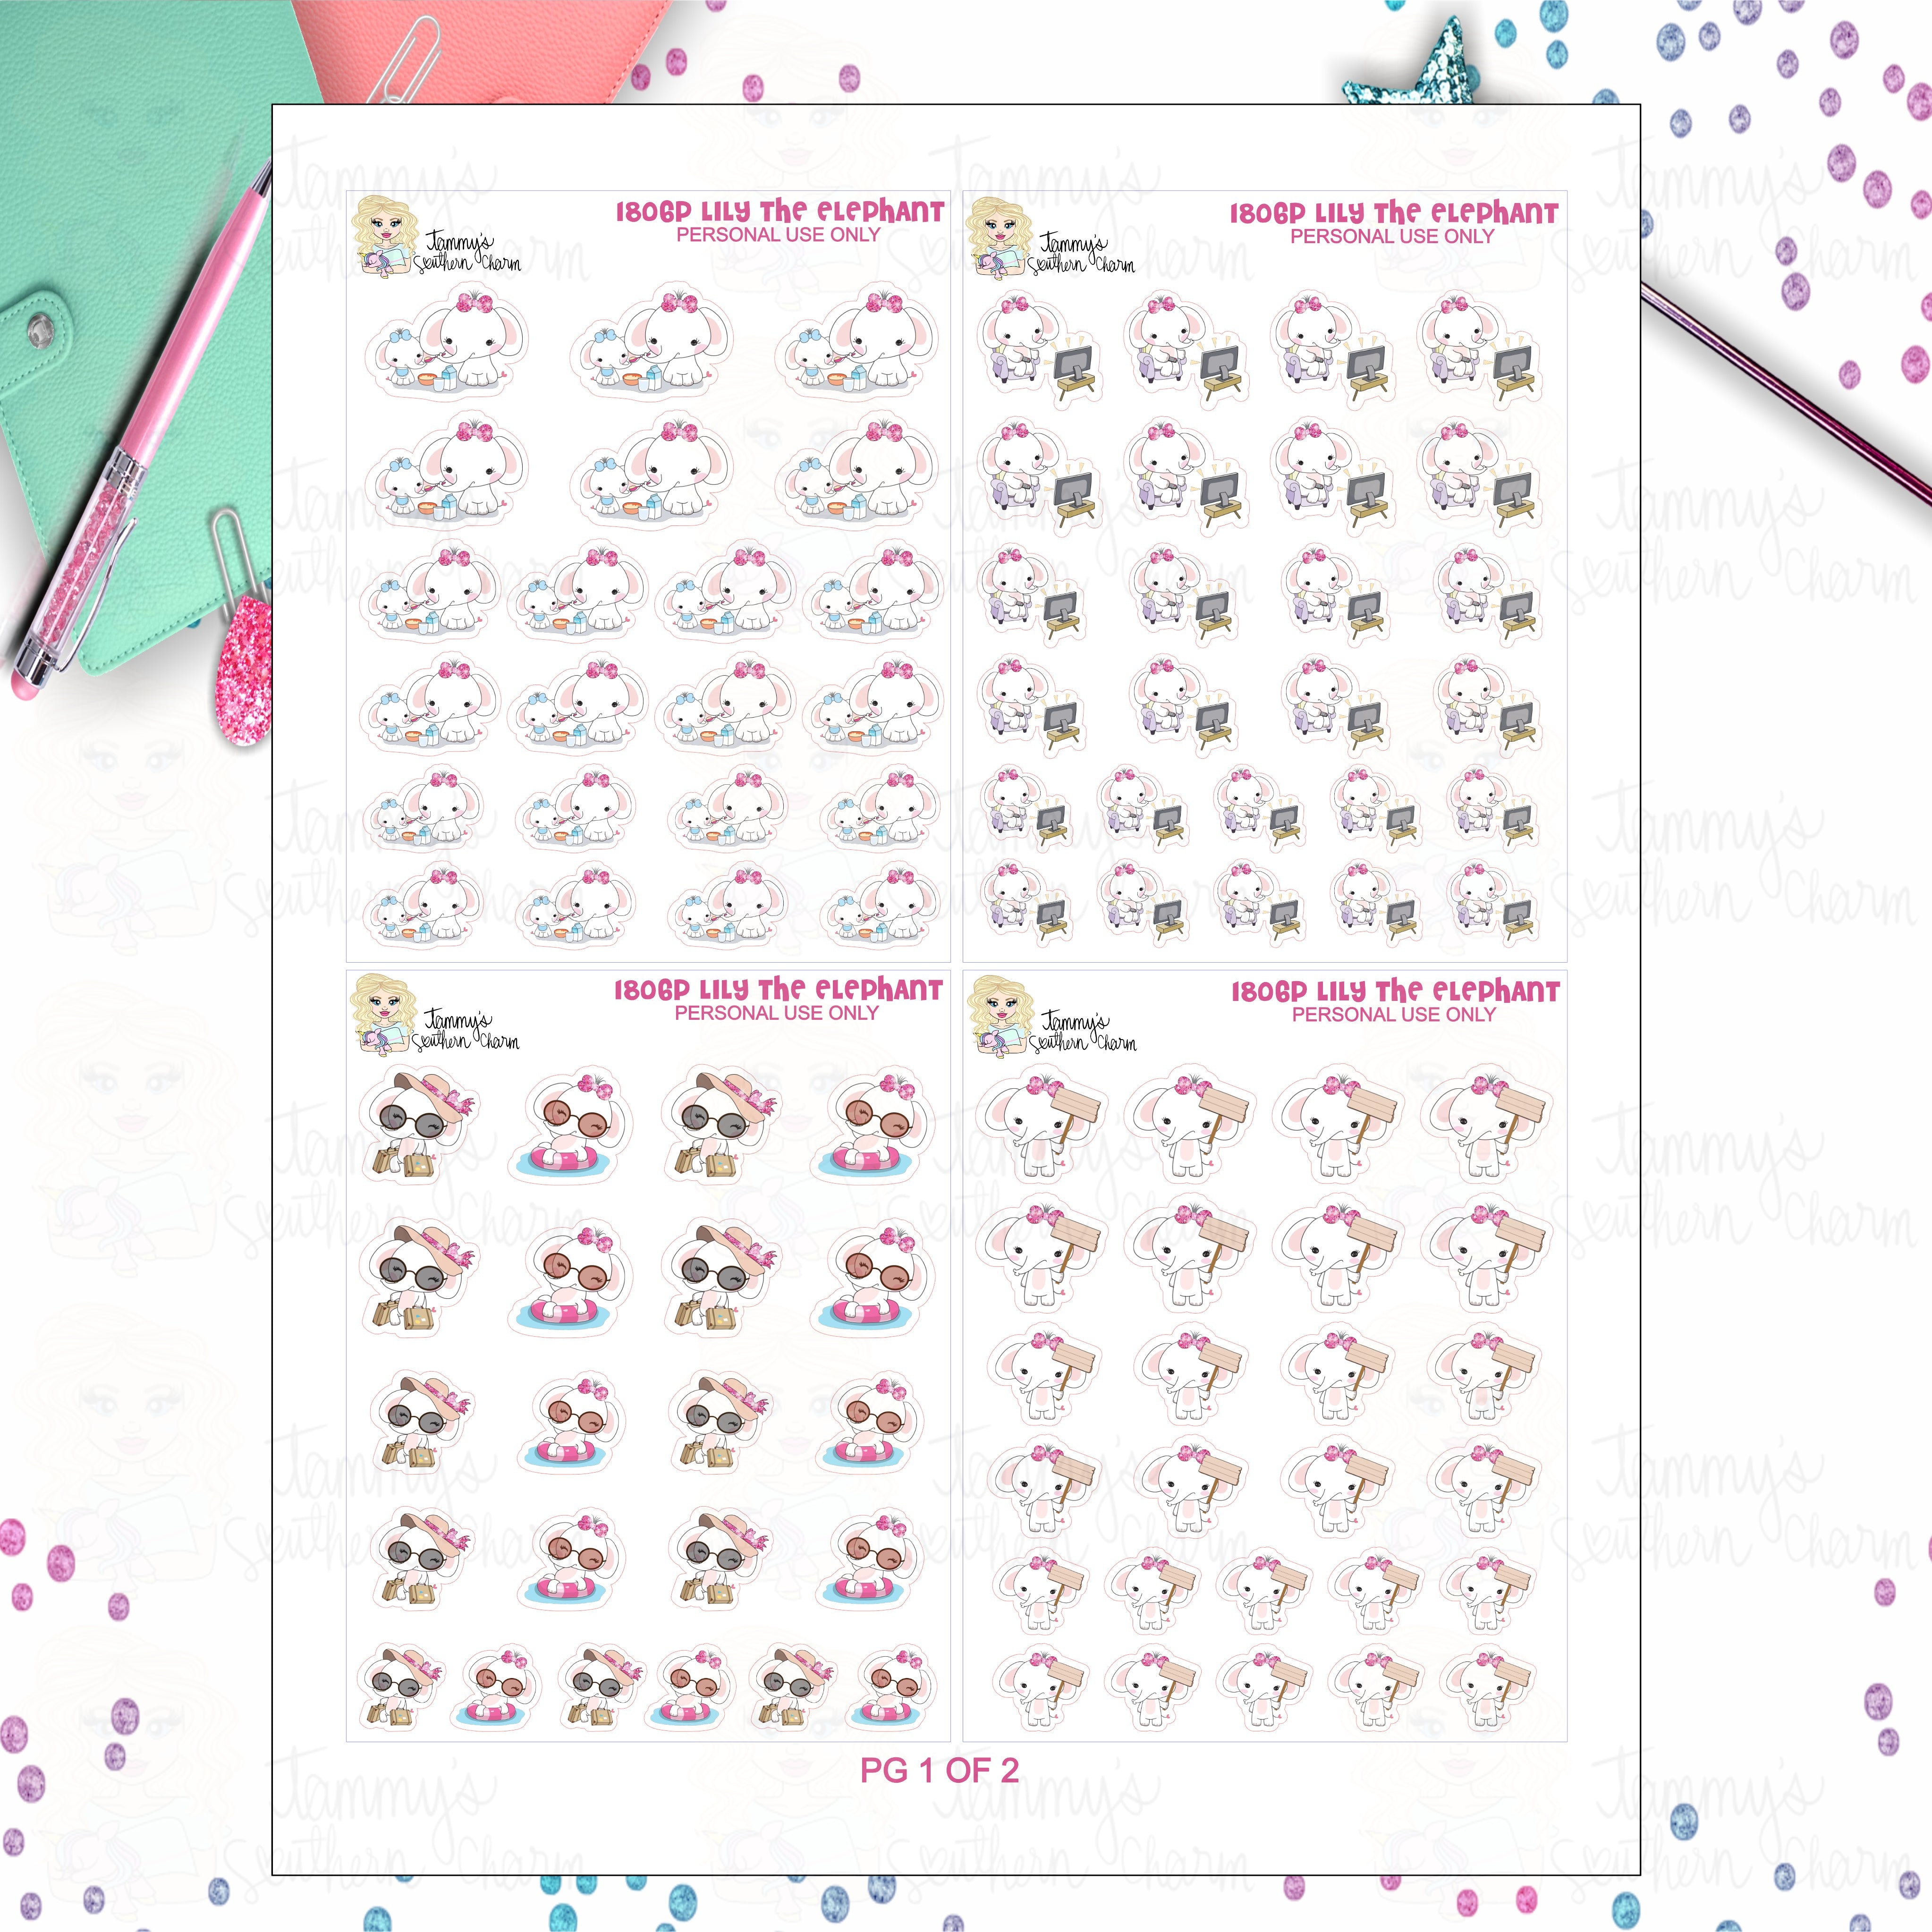 1806P - LILY THE ELEPHANT - MINI SHEETS (INSTANT DOWNLOAD)